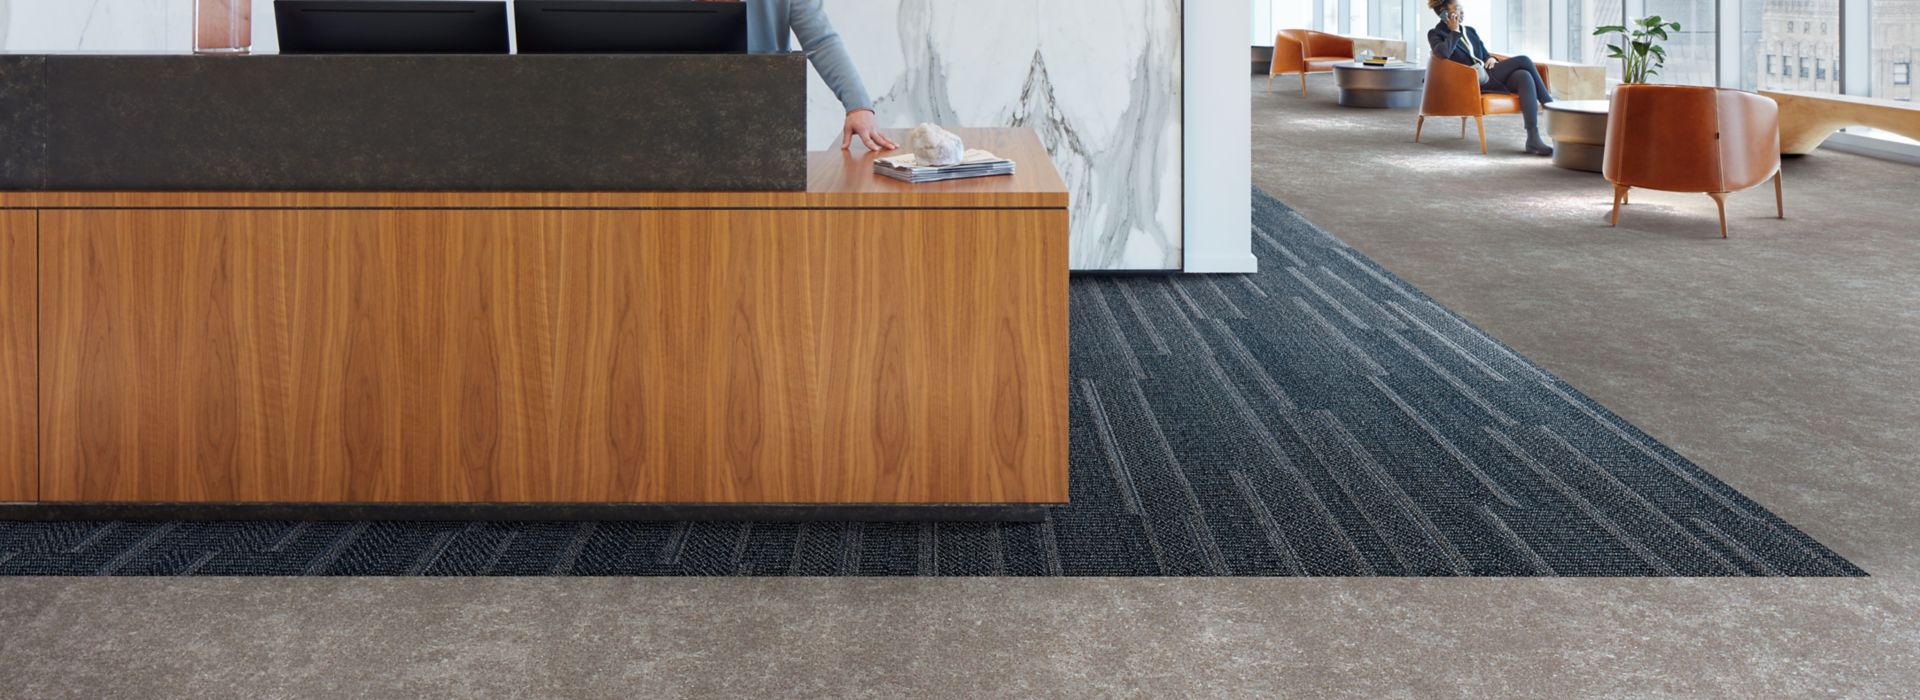 Interface Simple Sash plank carpet tile and Walk of Life LVT in a corporate lobby area with front desk  numéro d’image 1